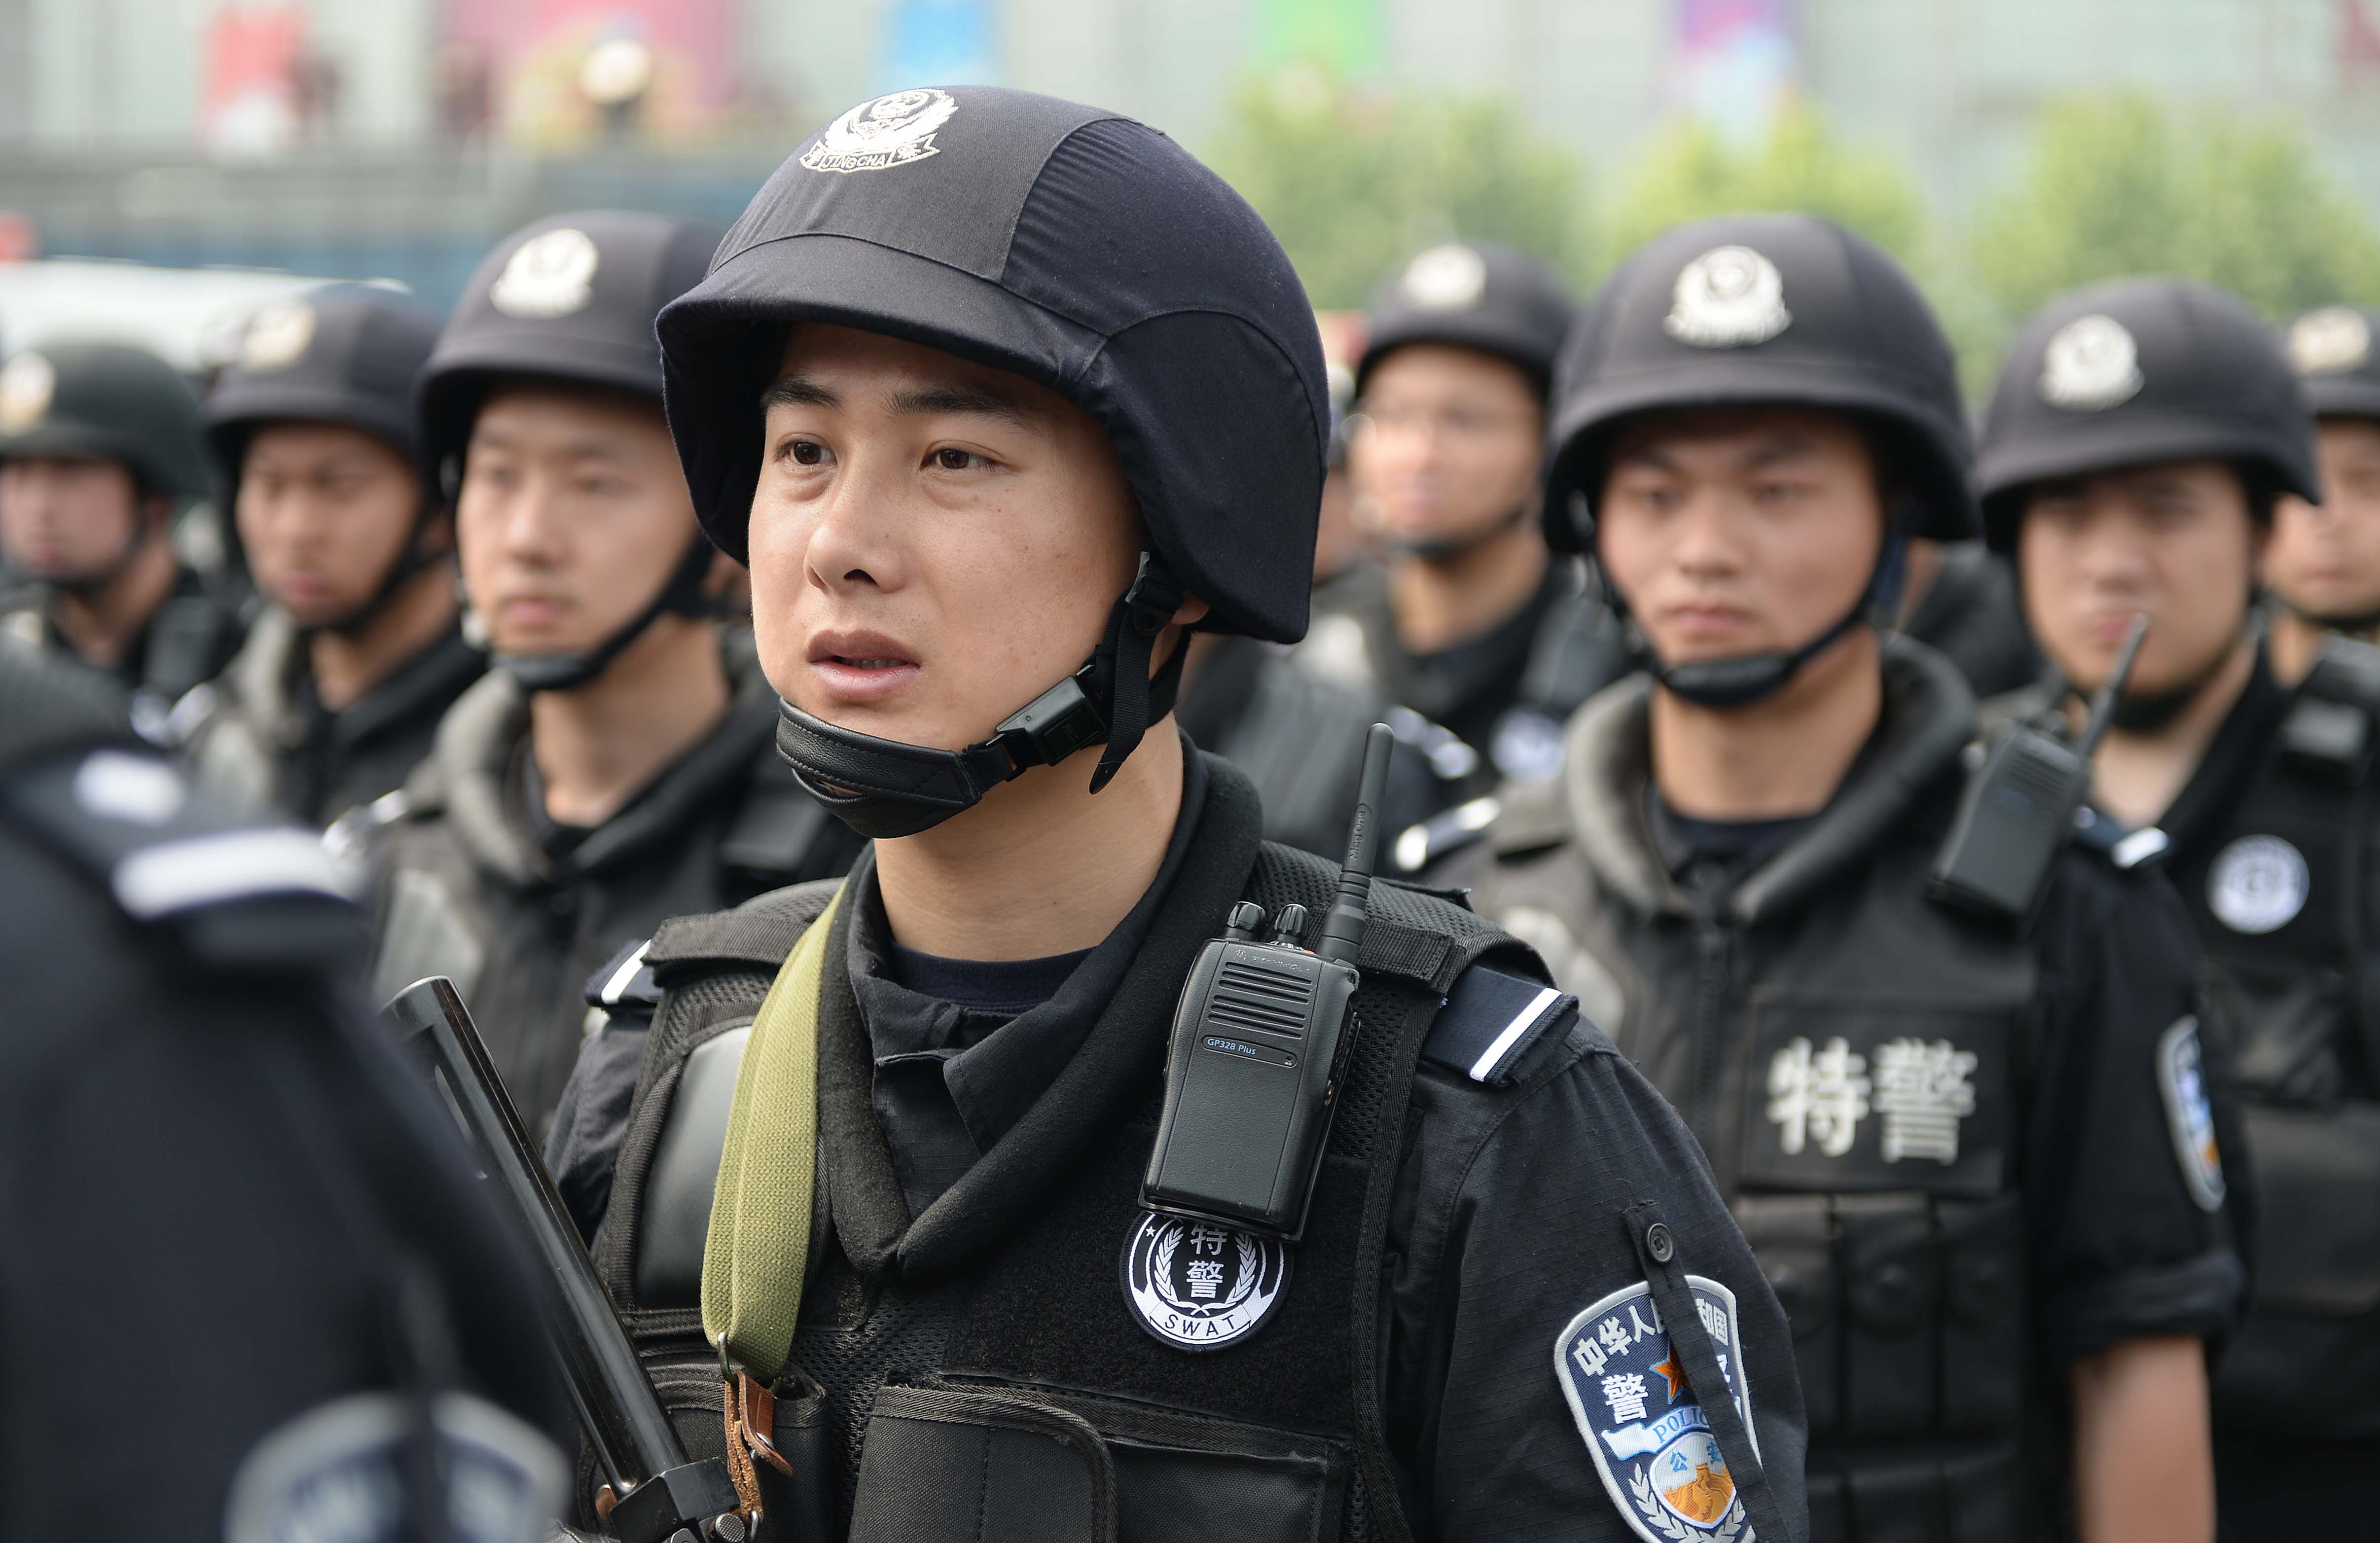 Security personnel take part in joint armed patrols to guard Shanghai railway station. Photo: AFP